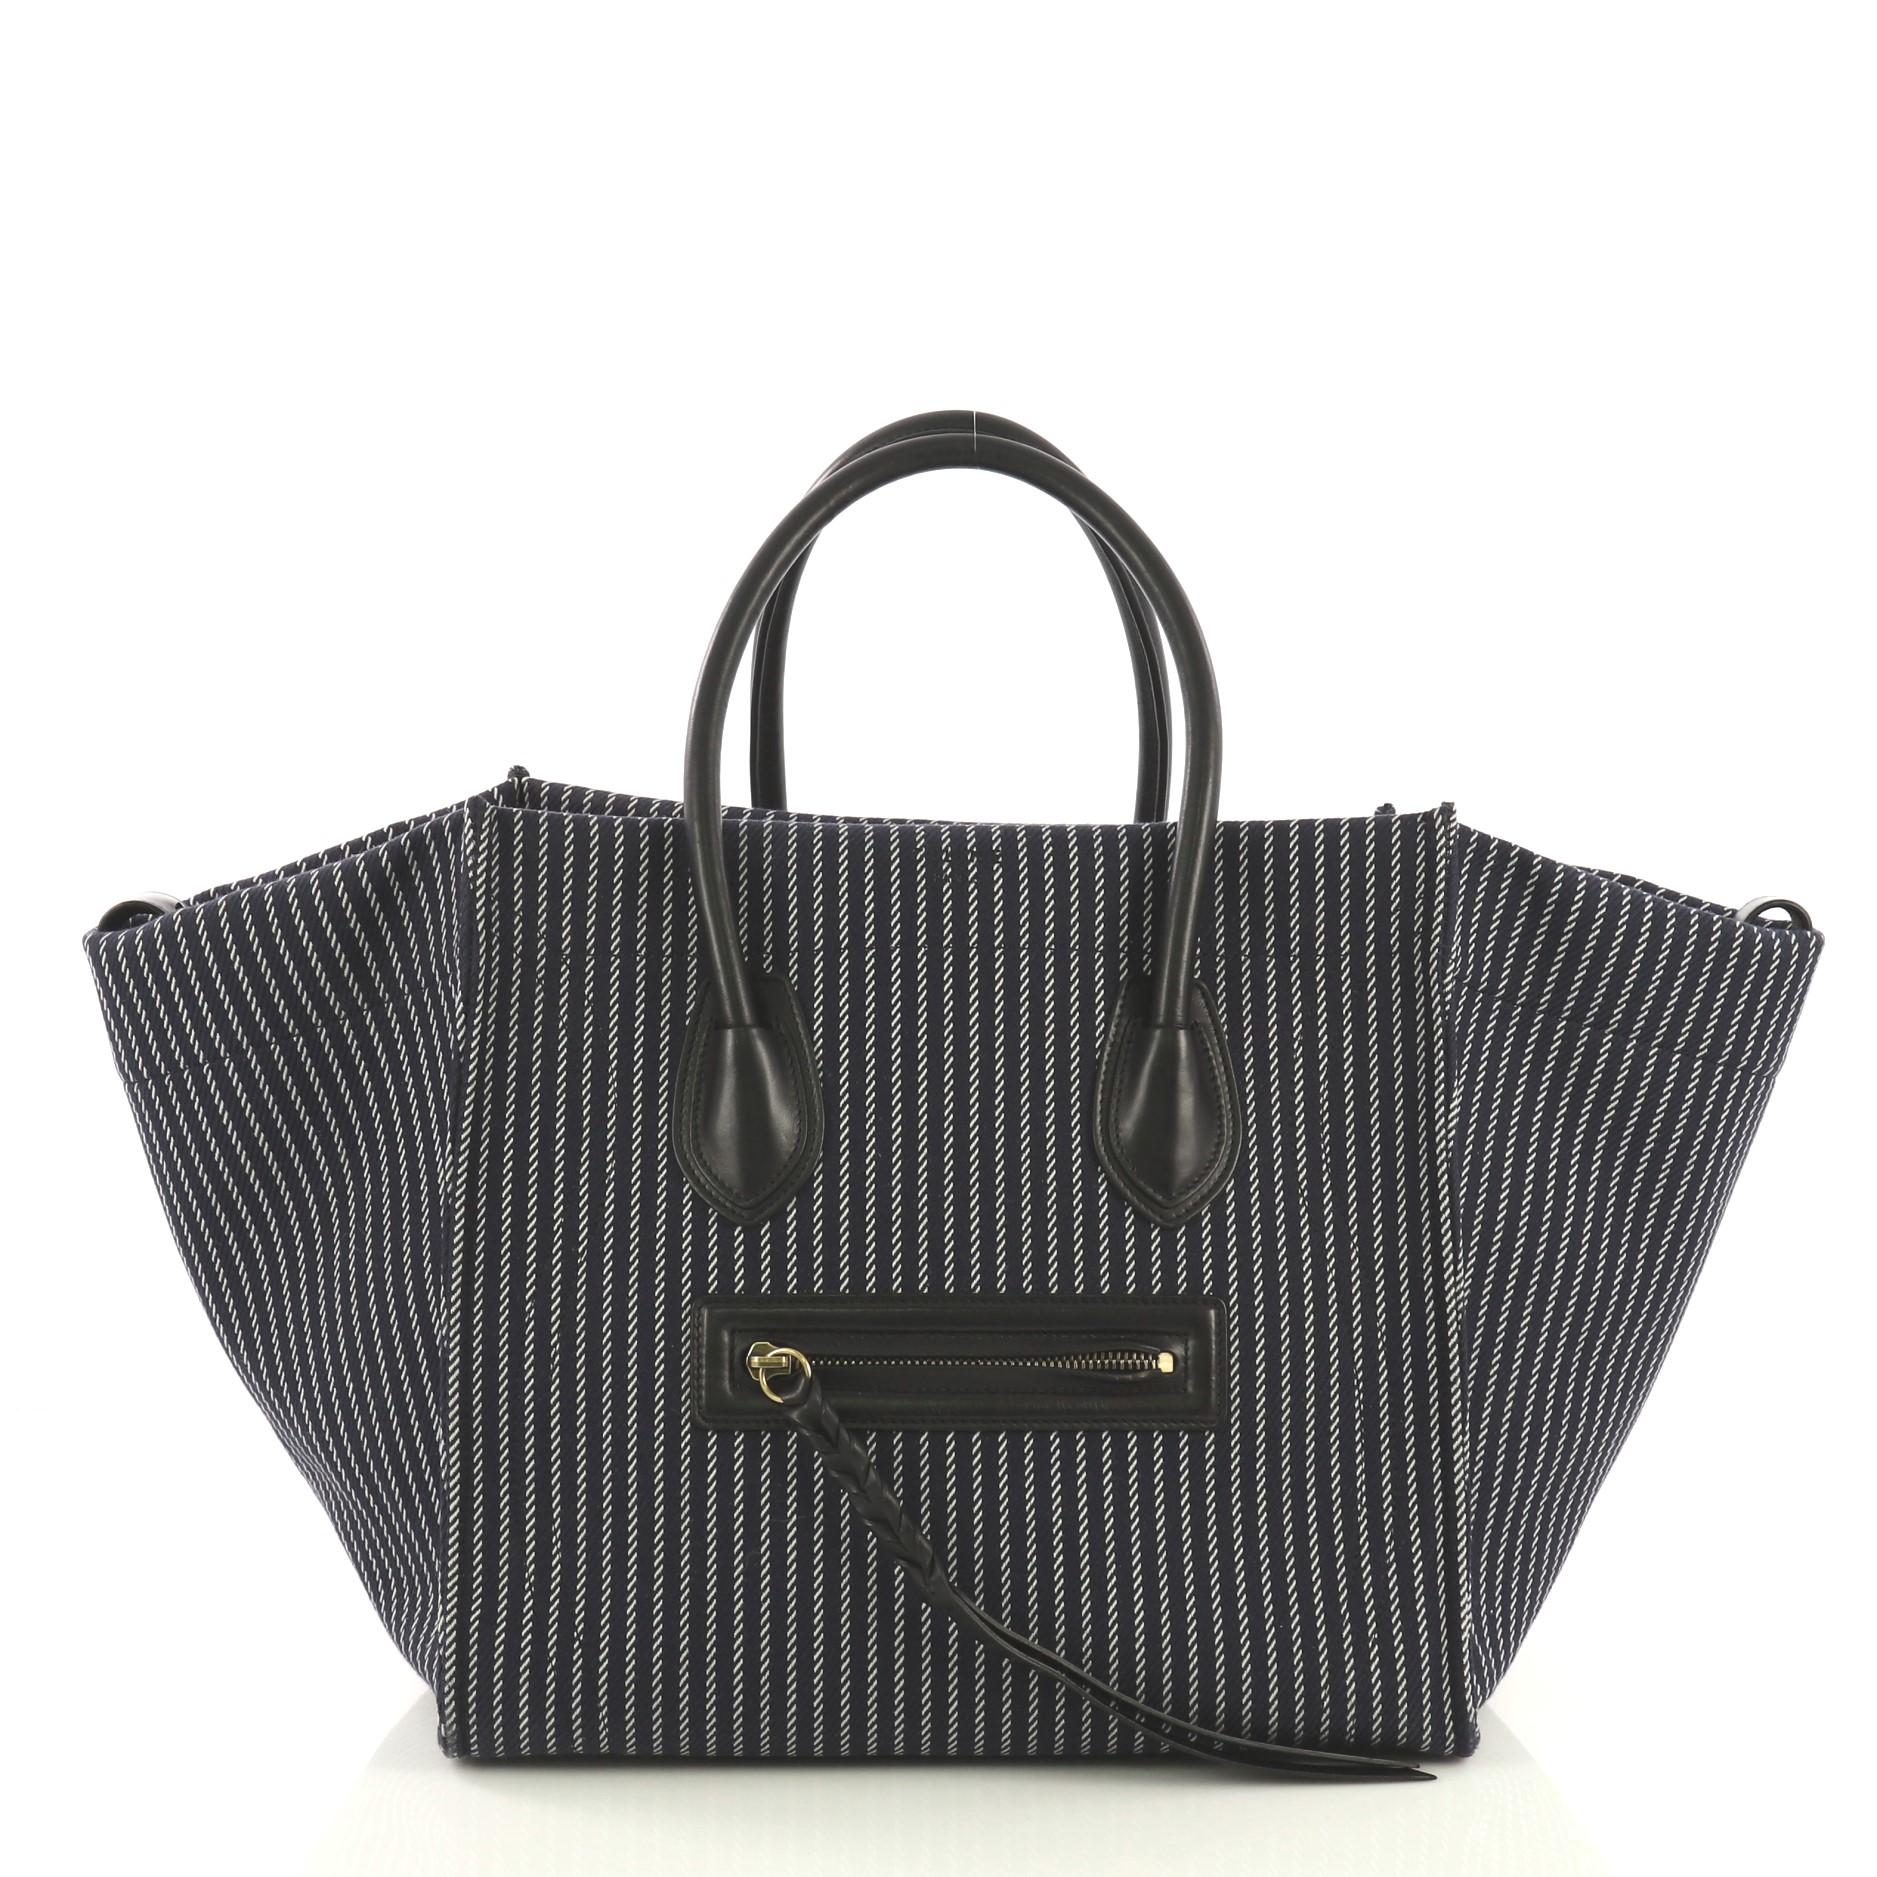 This Celine Phantom Handbag Canvas Medium, crafted from navy blue and white striped canvas, features dual rolled leather handles, exterior front pocket, and aged gold-tone hardware. It opens to a navy striped canvas interior with side zip pocket.